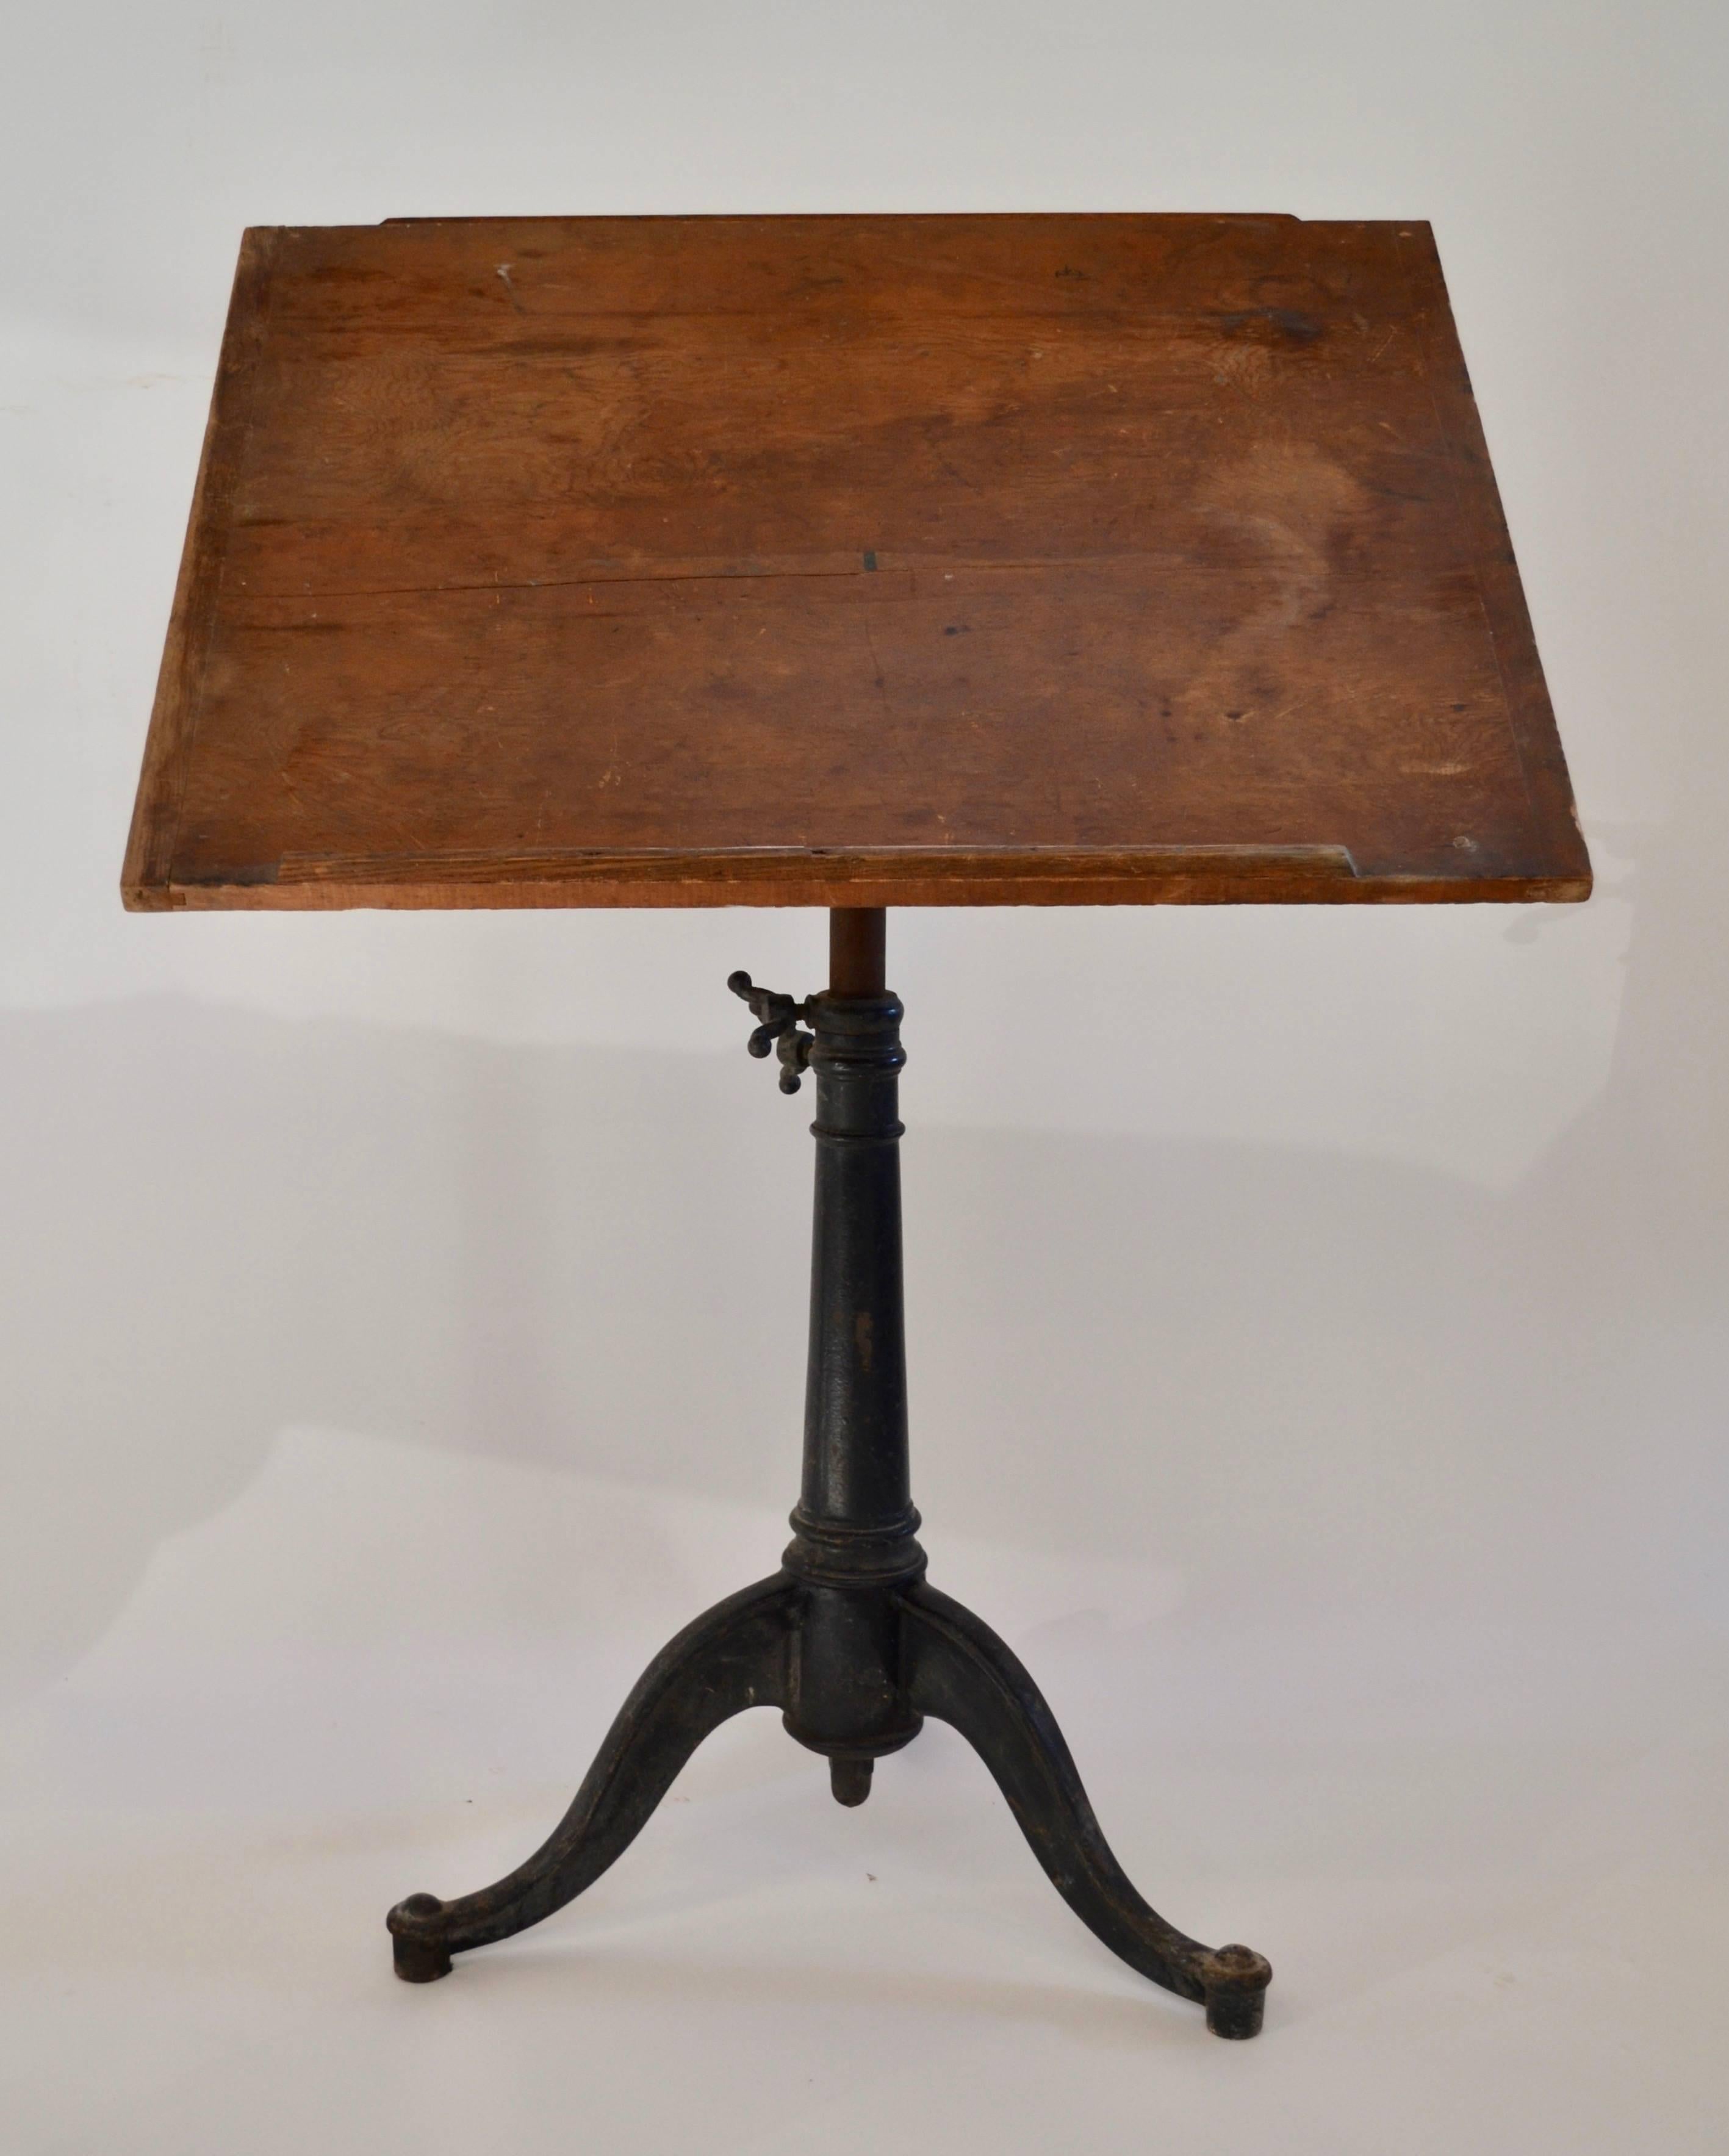 This drafting table has an original pine top and a very unusual drop down drafting instrument shelf, circa 1915
It adjusts from 30